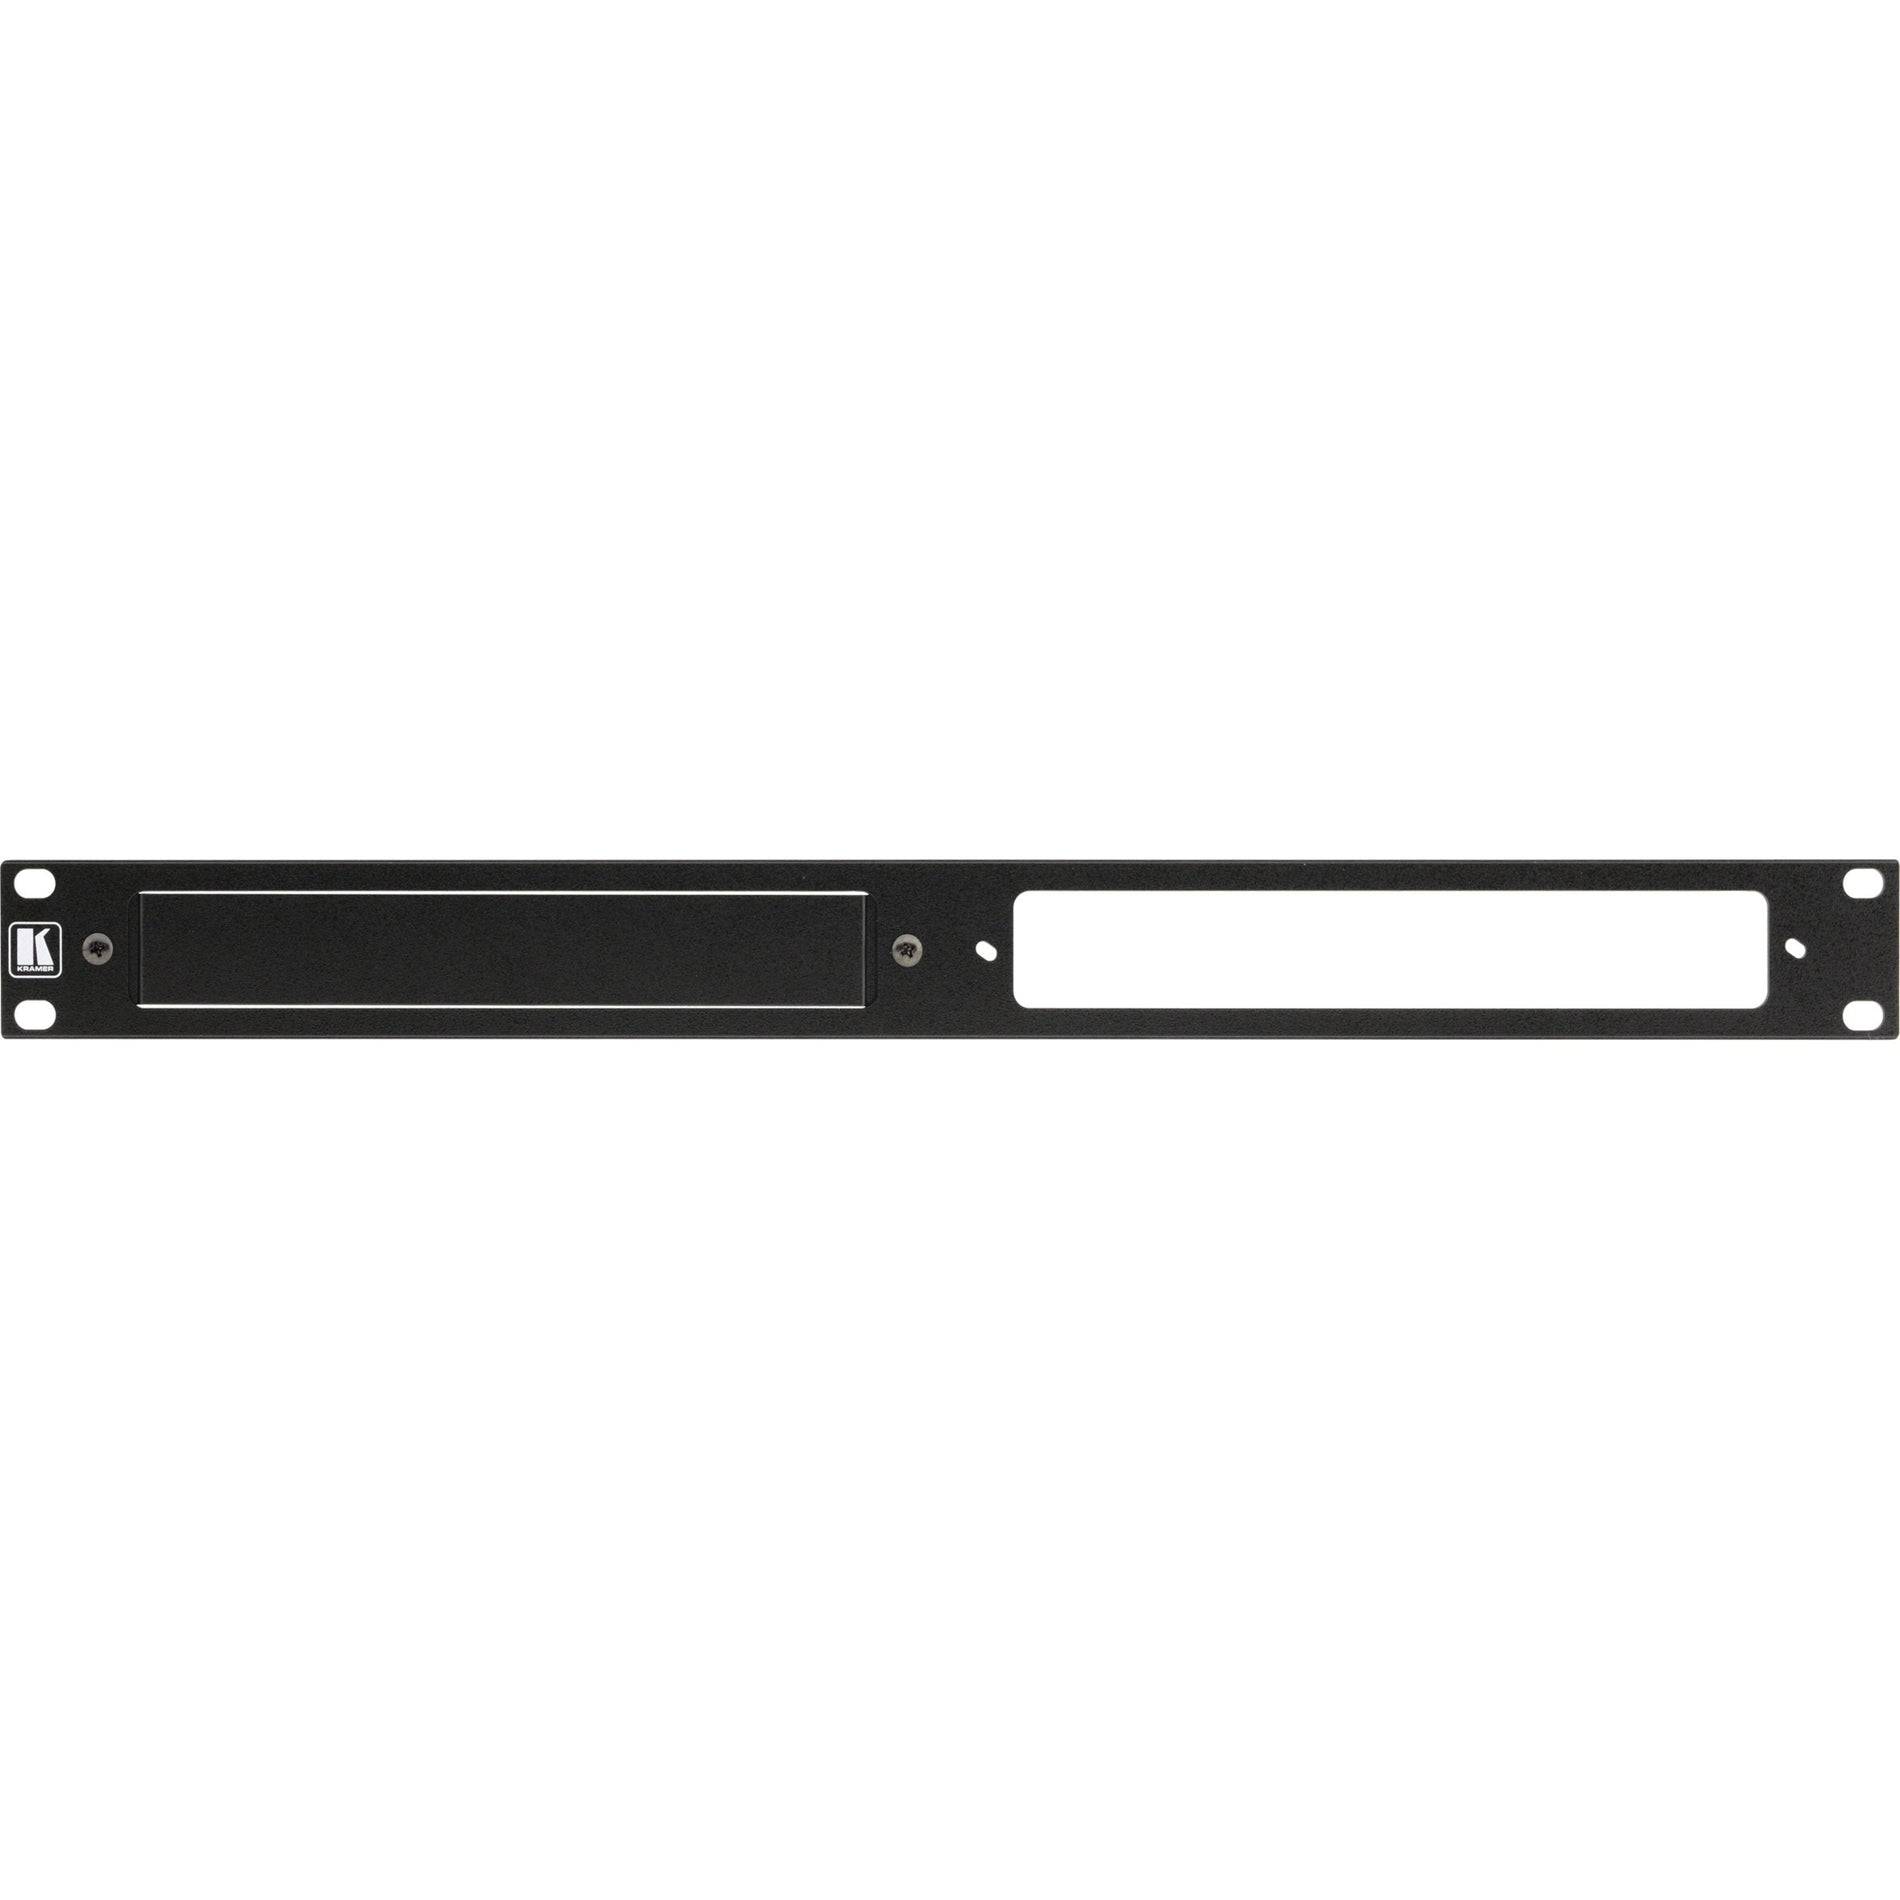 Kramer RK-T2B-B 19-Inch Rack Adapter for MegaTOOLS, Easy Tool Organization and Accessibility